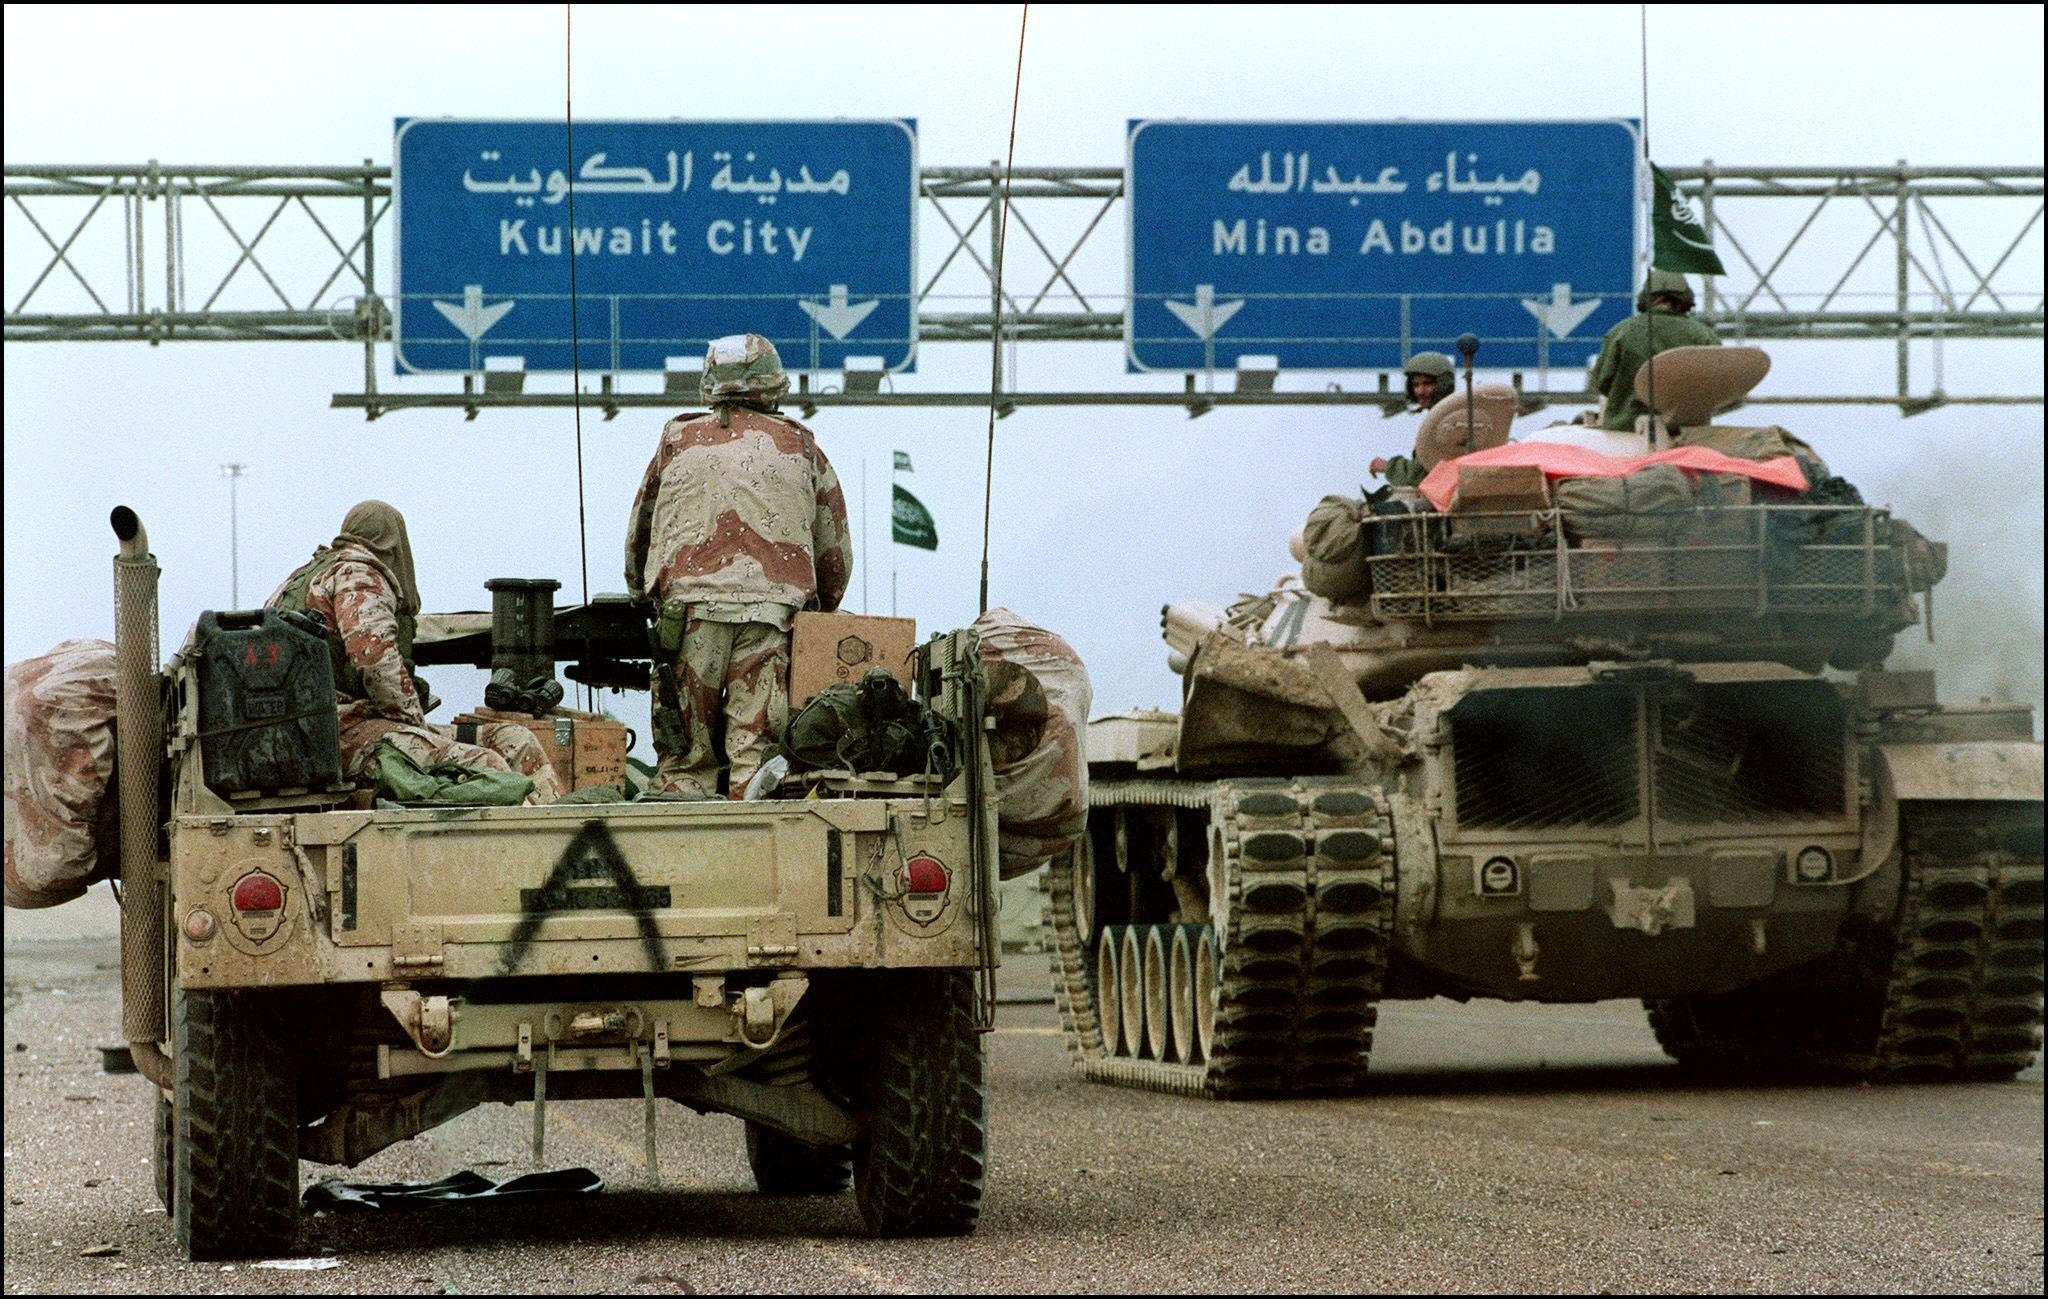 A US Humvee and a Saudi tank pass under a sign directing them to Kuwait City in February 1991 during the Desert Storm offensive